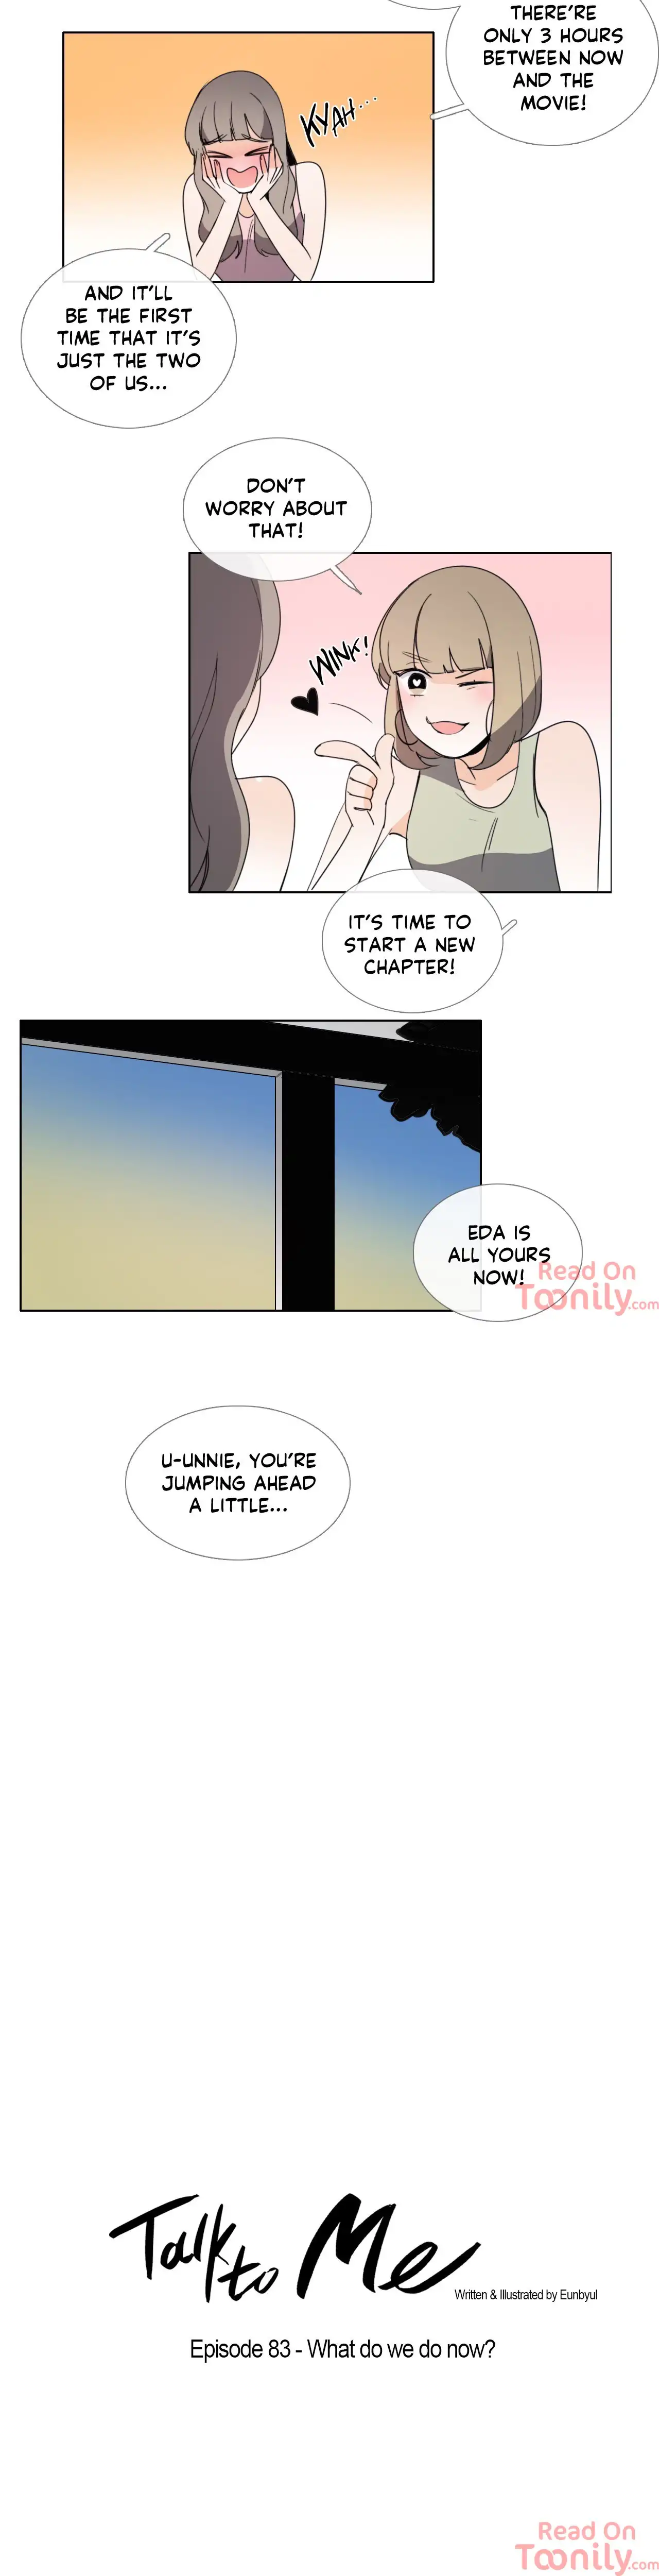 Talk to Me - Chapter 83 Page 3